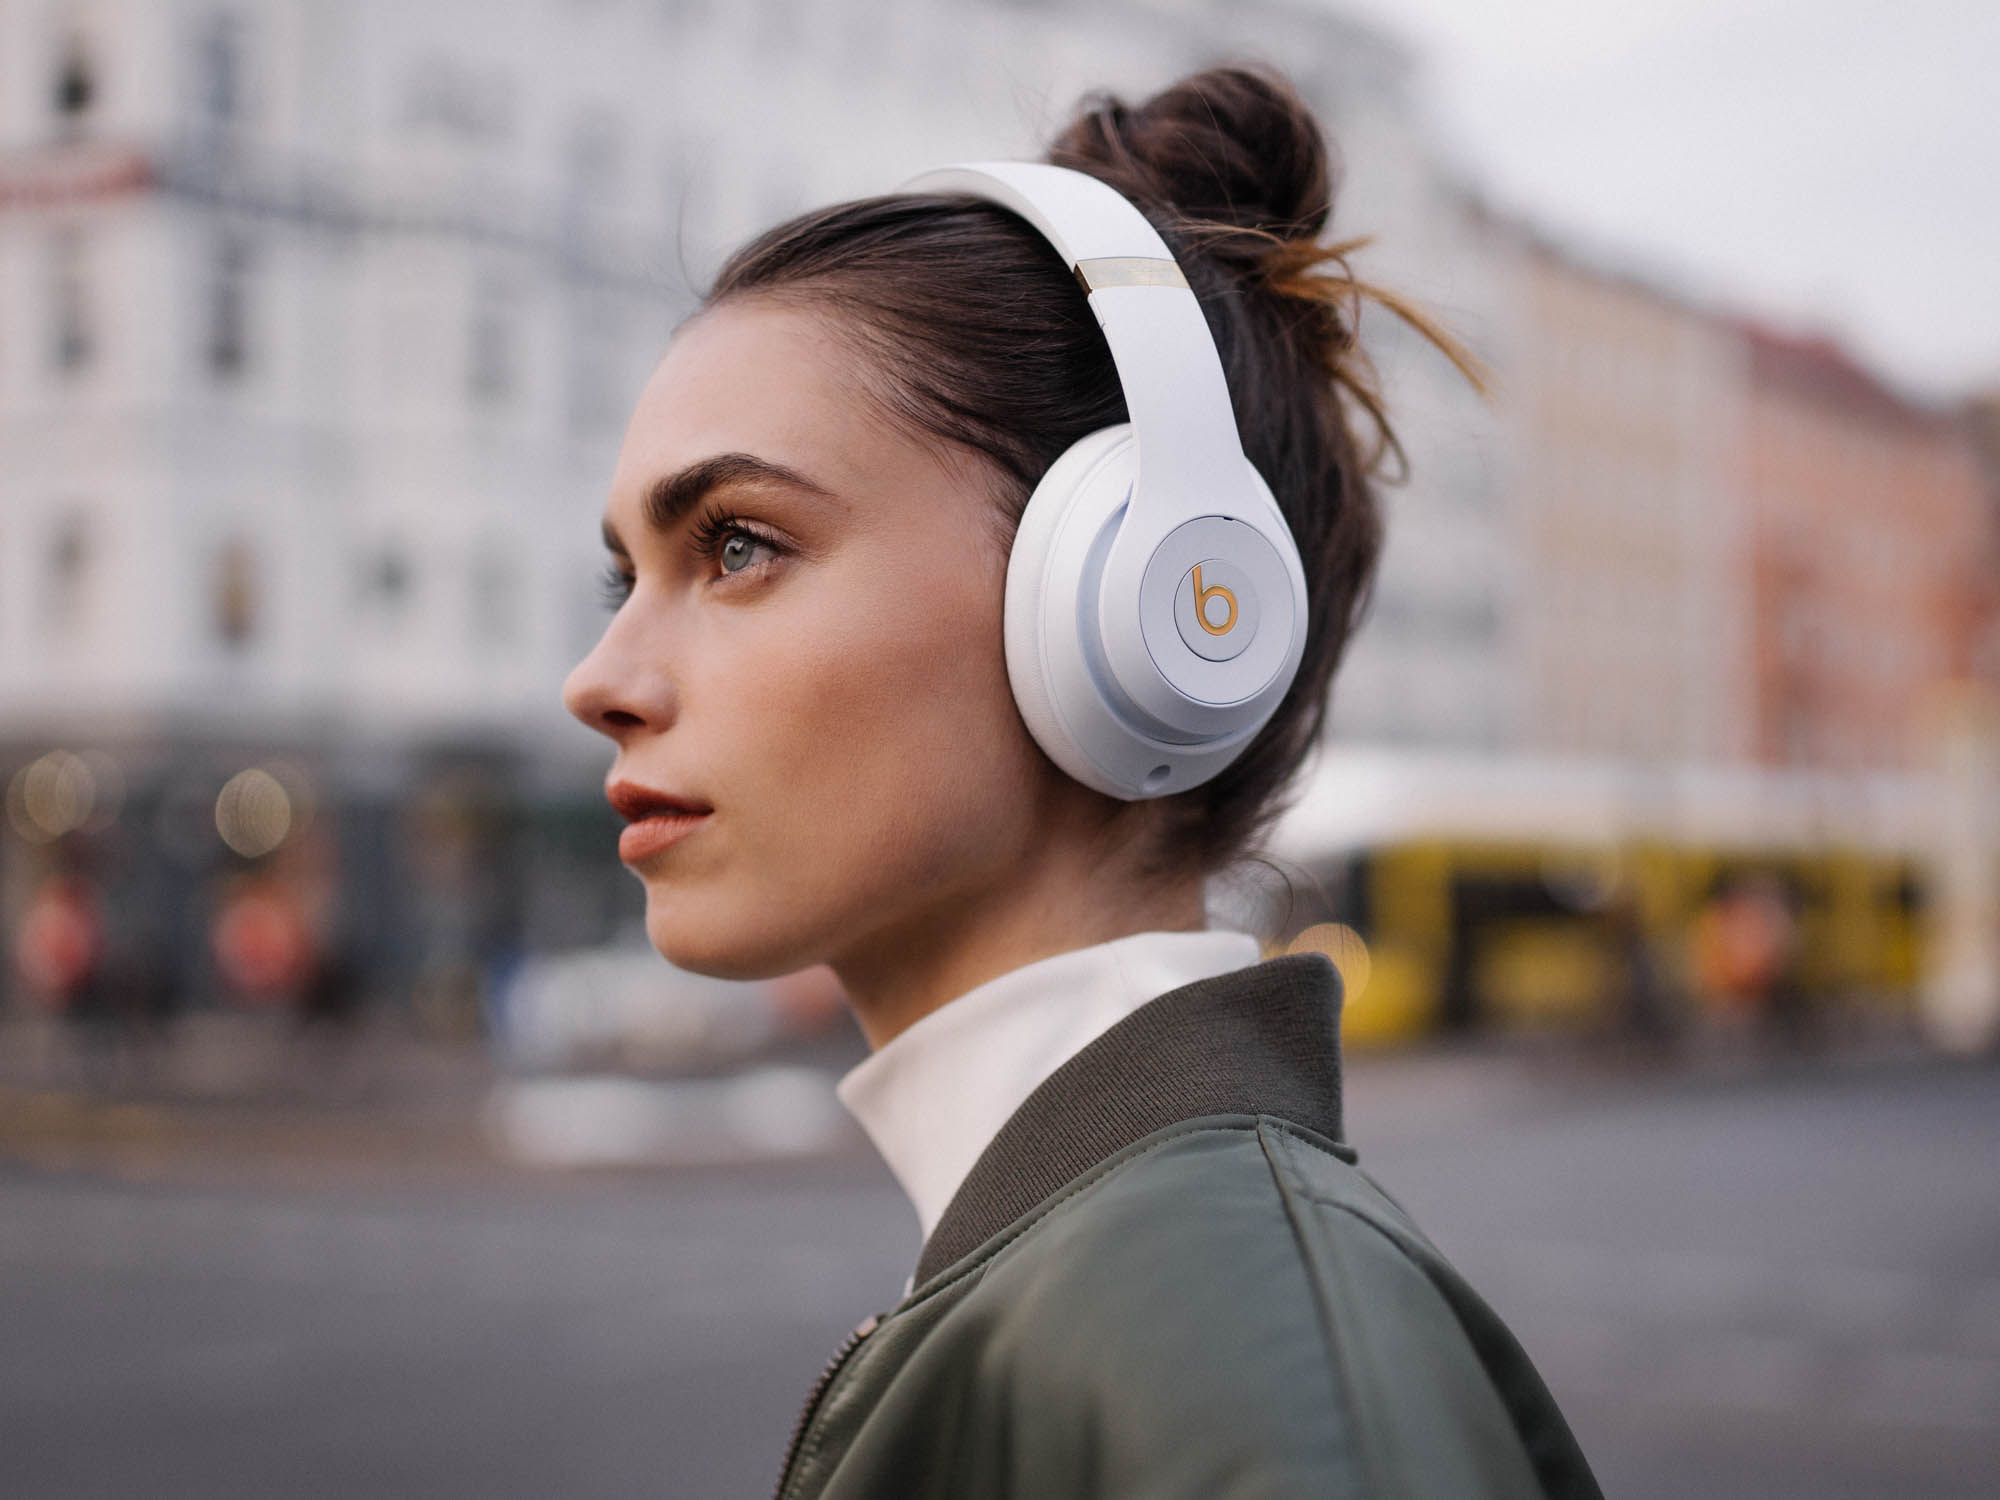 A woman wearing the Beats Studio 3 wireless headphones while outdoors.